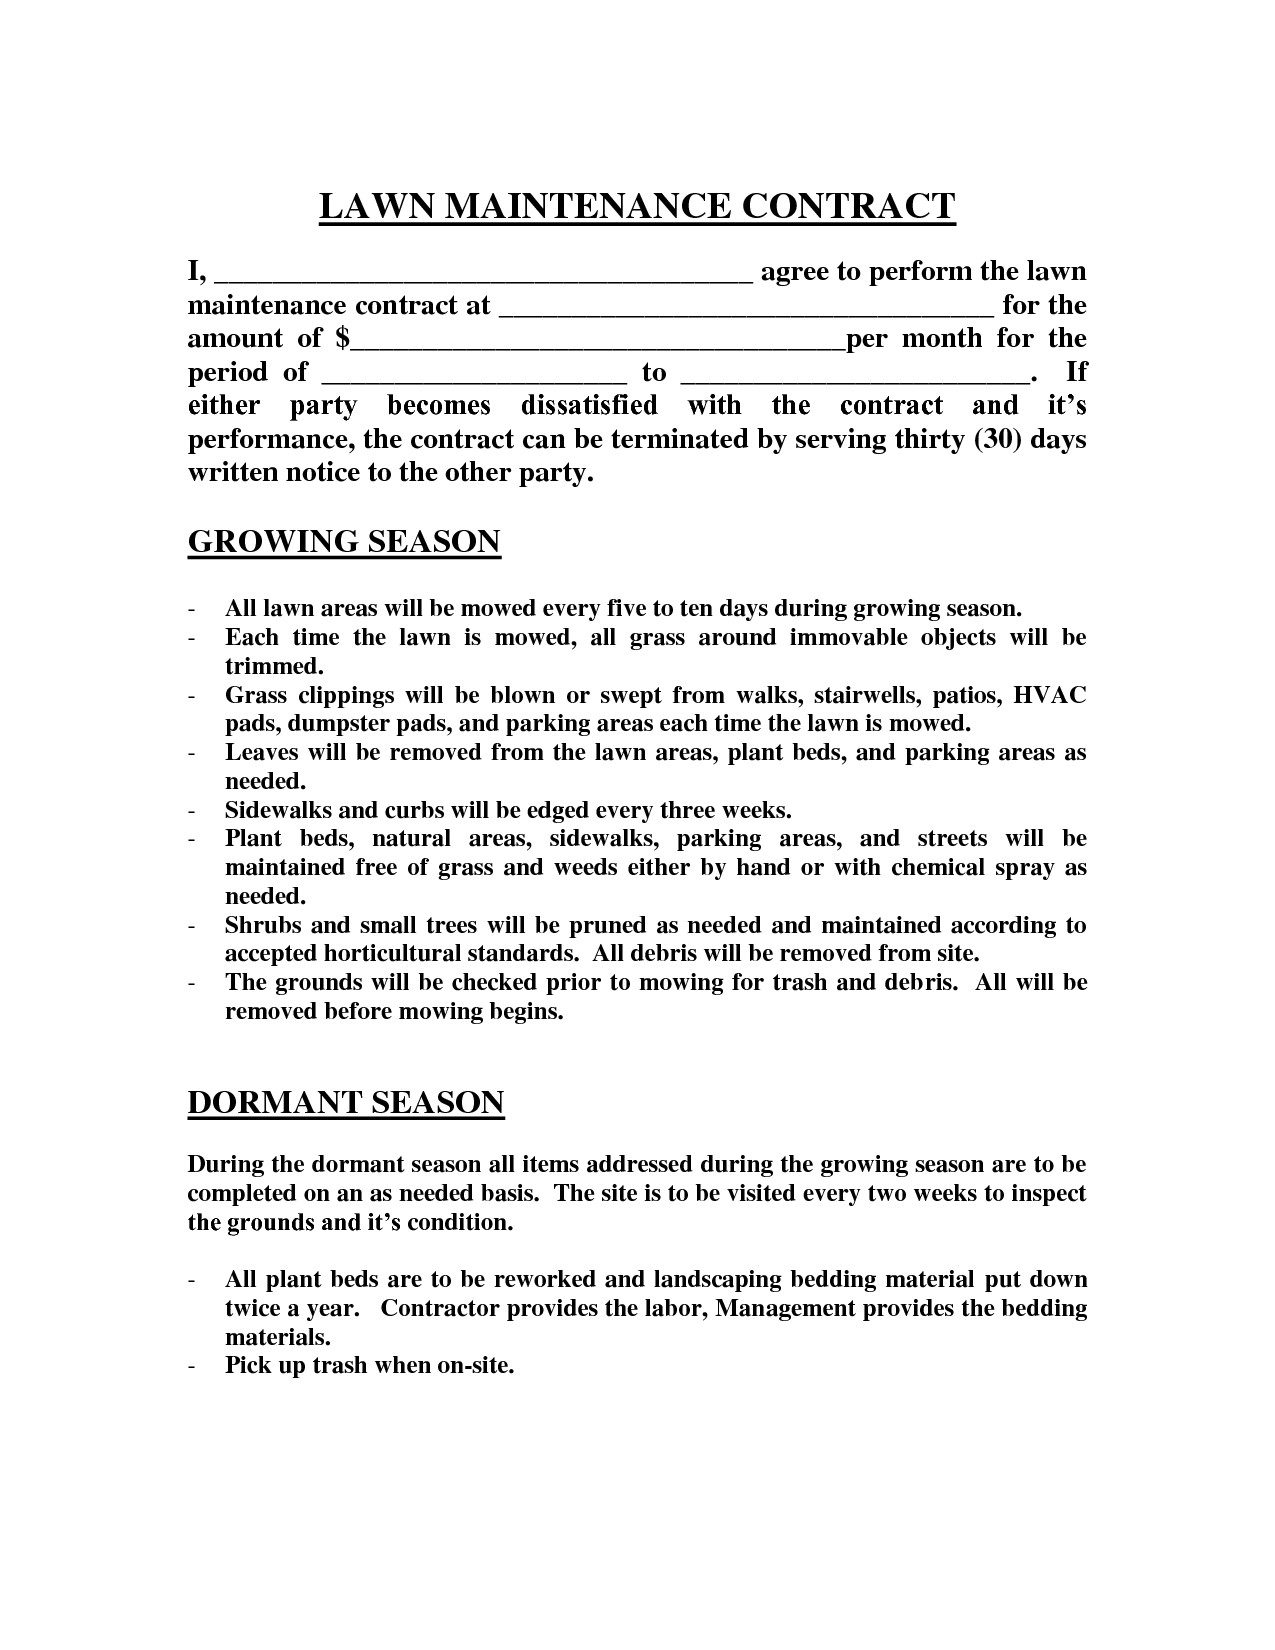 Lawn Maintenance Contract Agreement Free Printable Documents